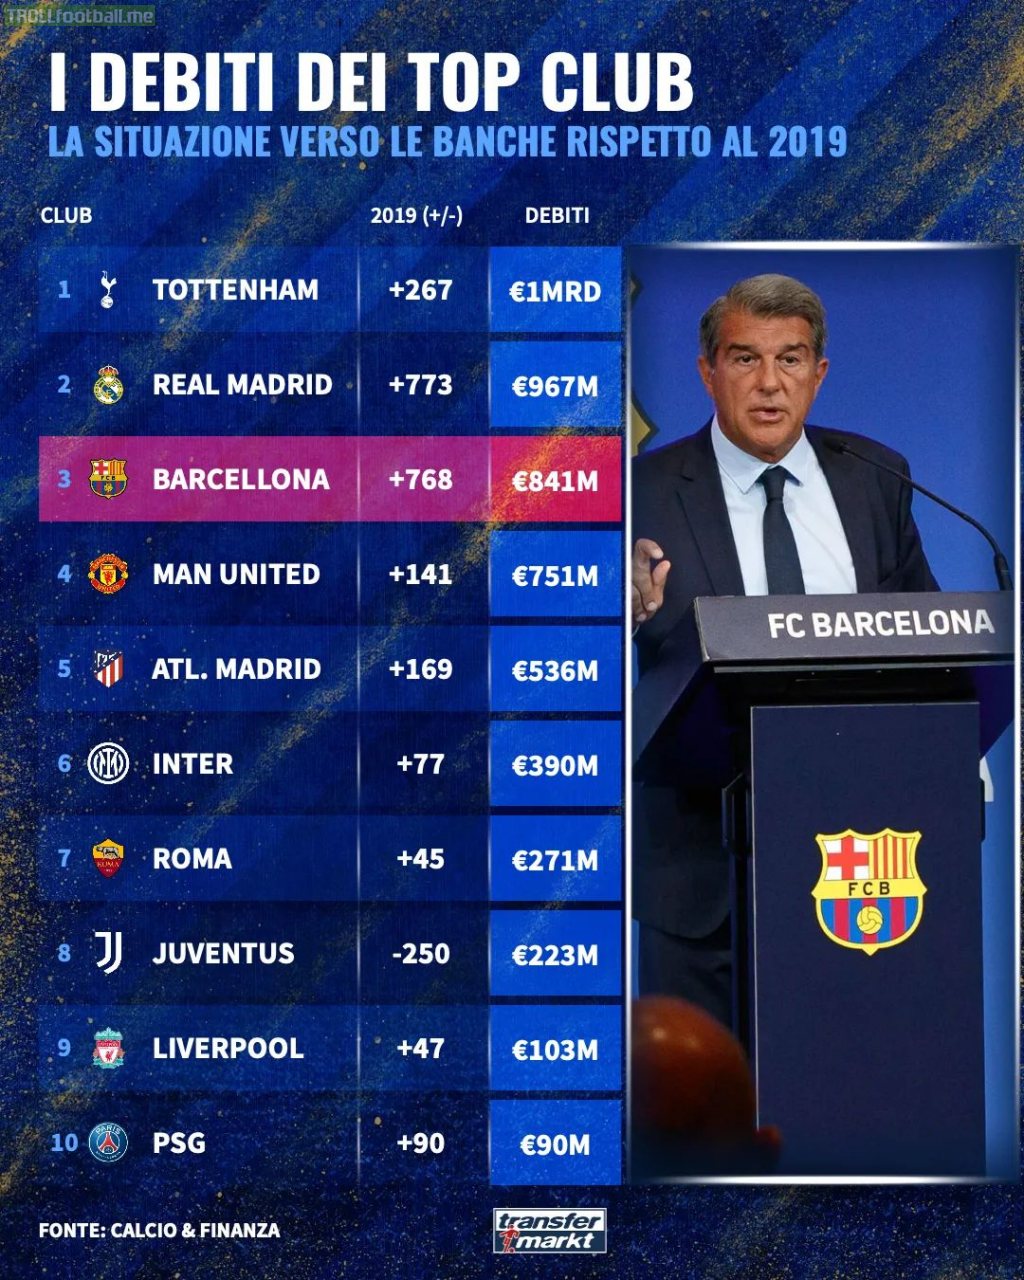 The amount of money that top clubs owe the banks. How it has increased or decreased since 2019 (+/-)